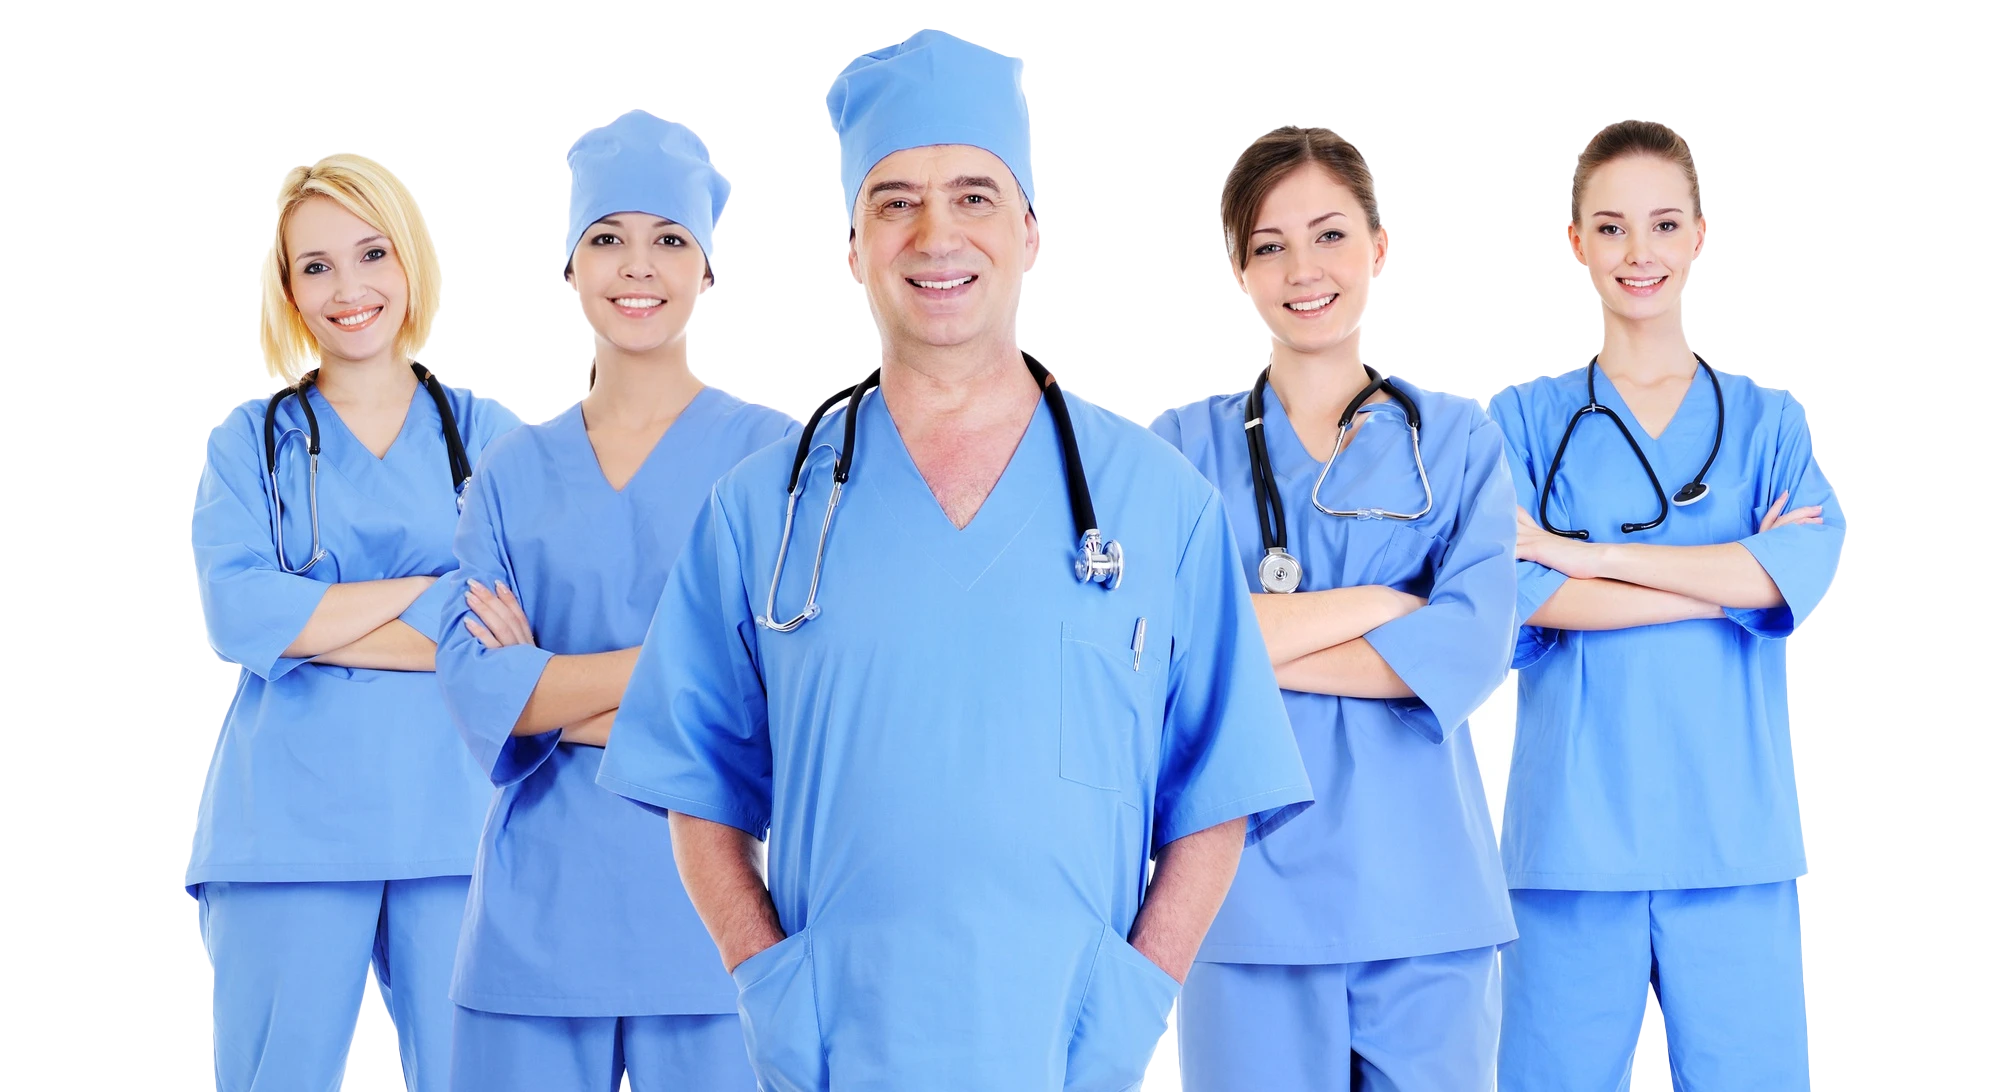 An Overview What is the Healthcare or Nurse Staffing App